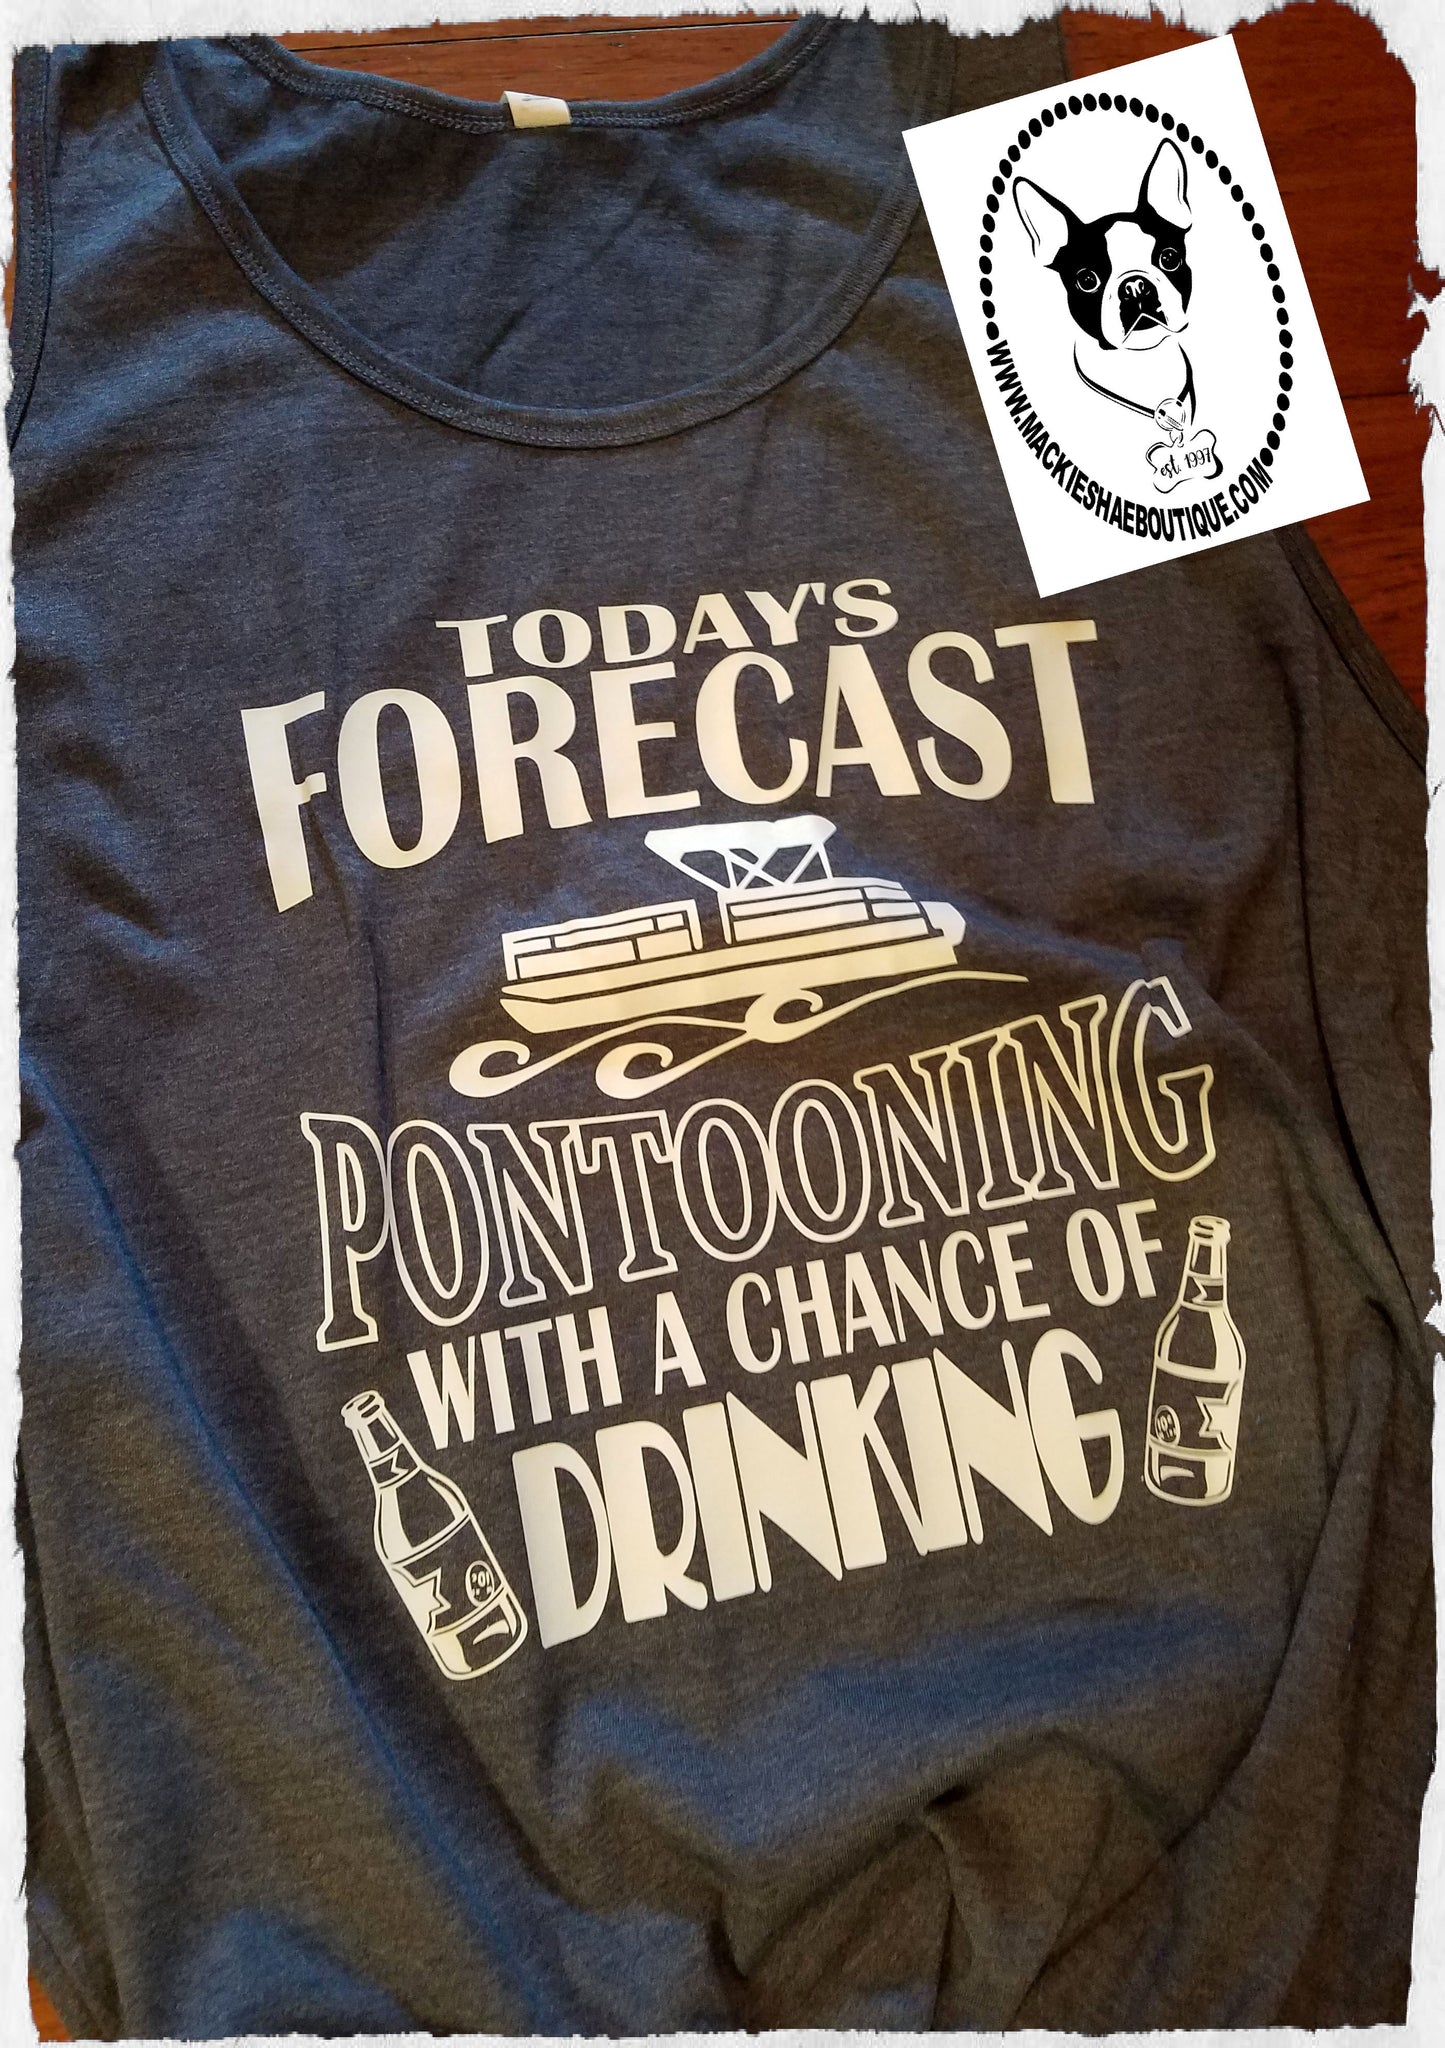 Today's Forecast... Pontooning with A Chance of Drinking Custom Shirt, Soft Tank